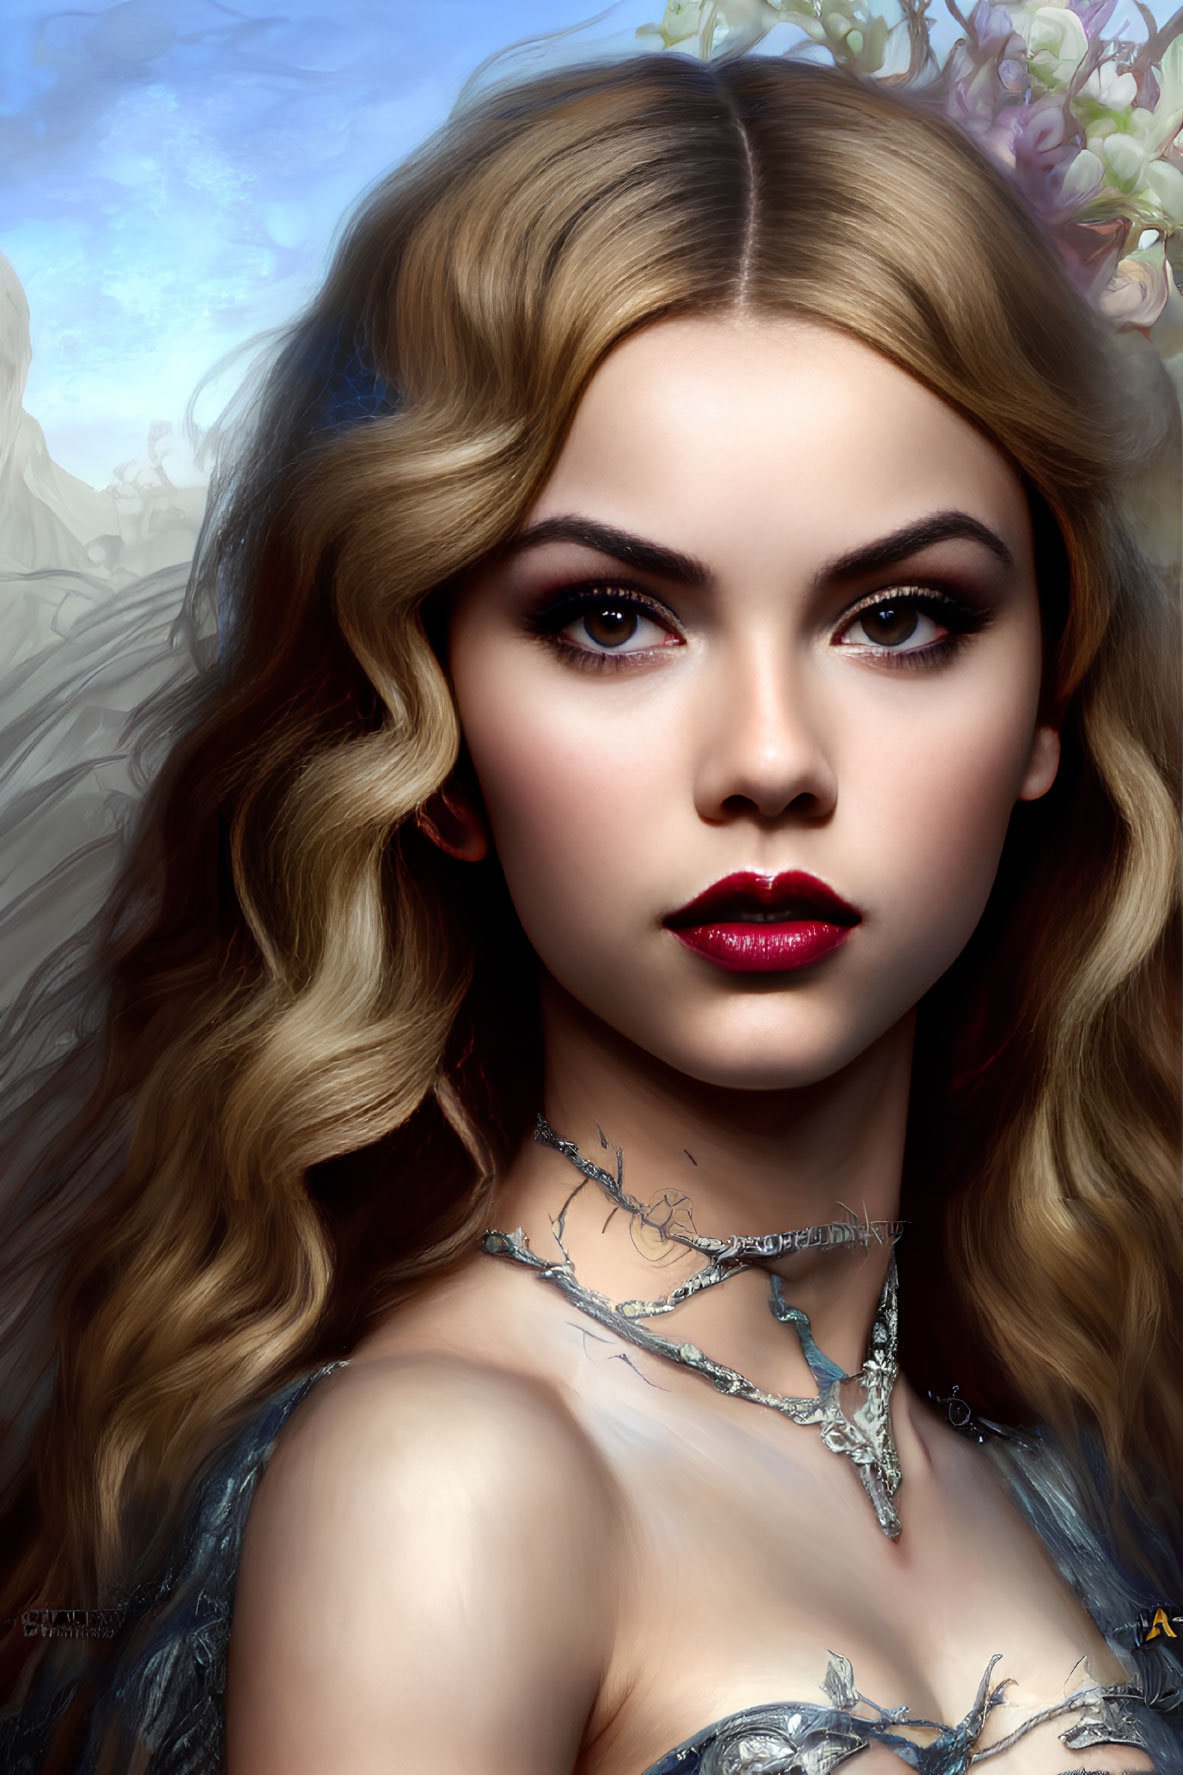 Digital portrait of woman with wavy hair and intense eyes, wearing twig necklace